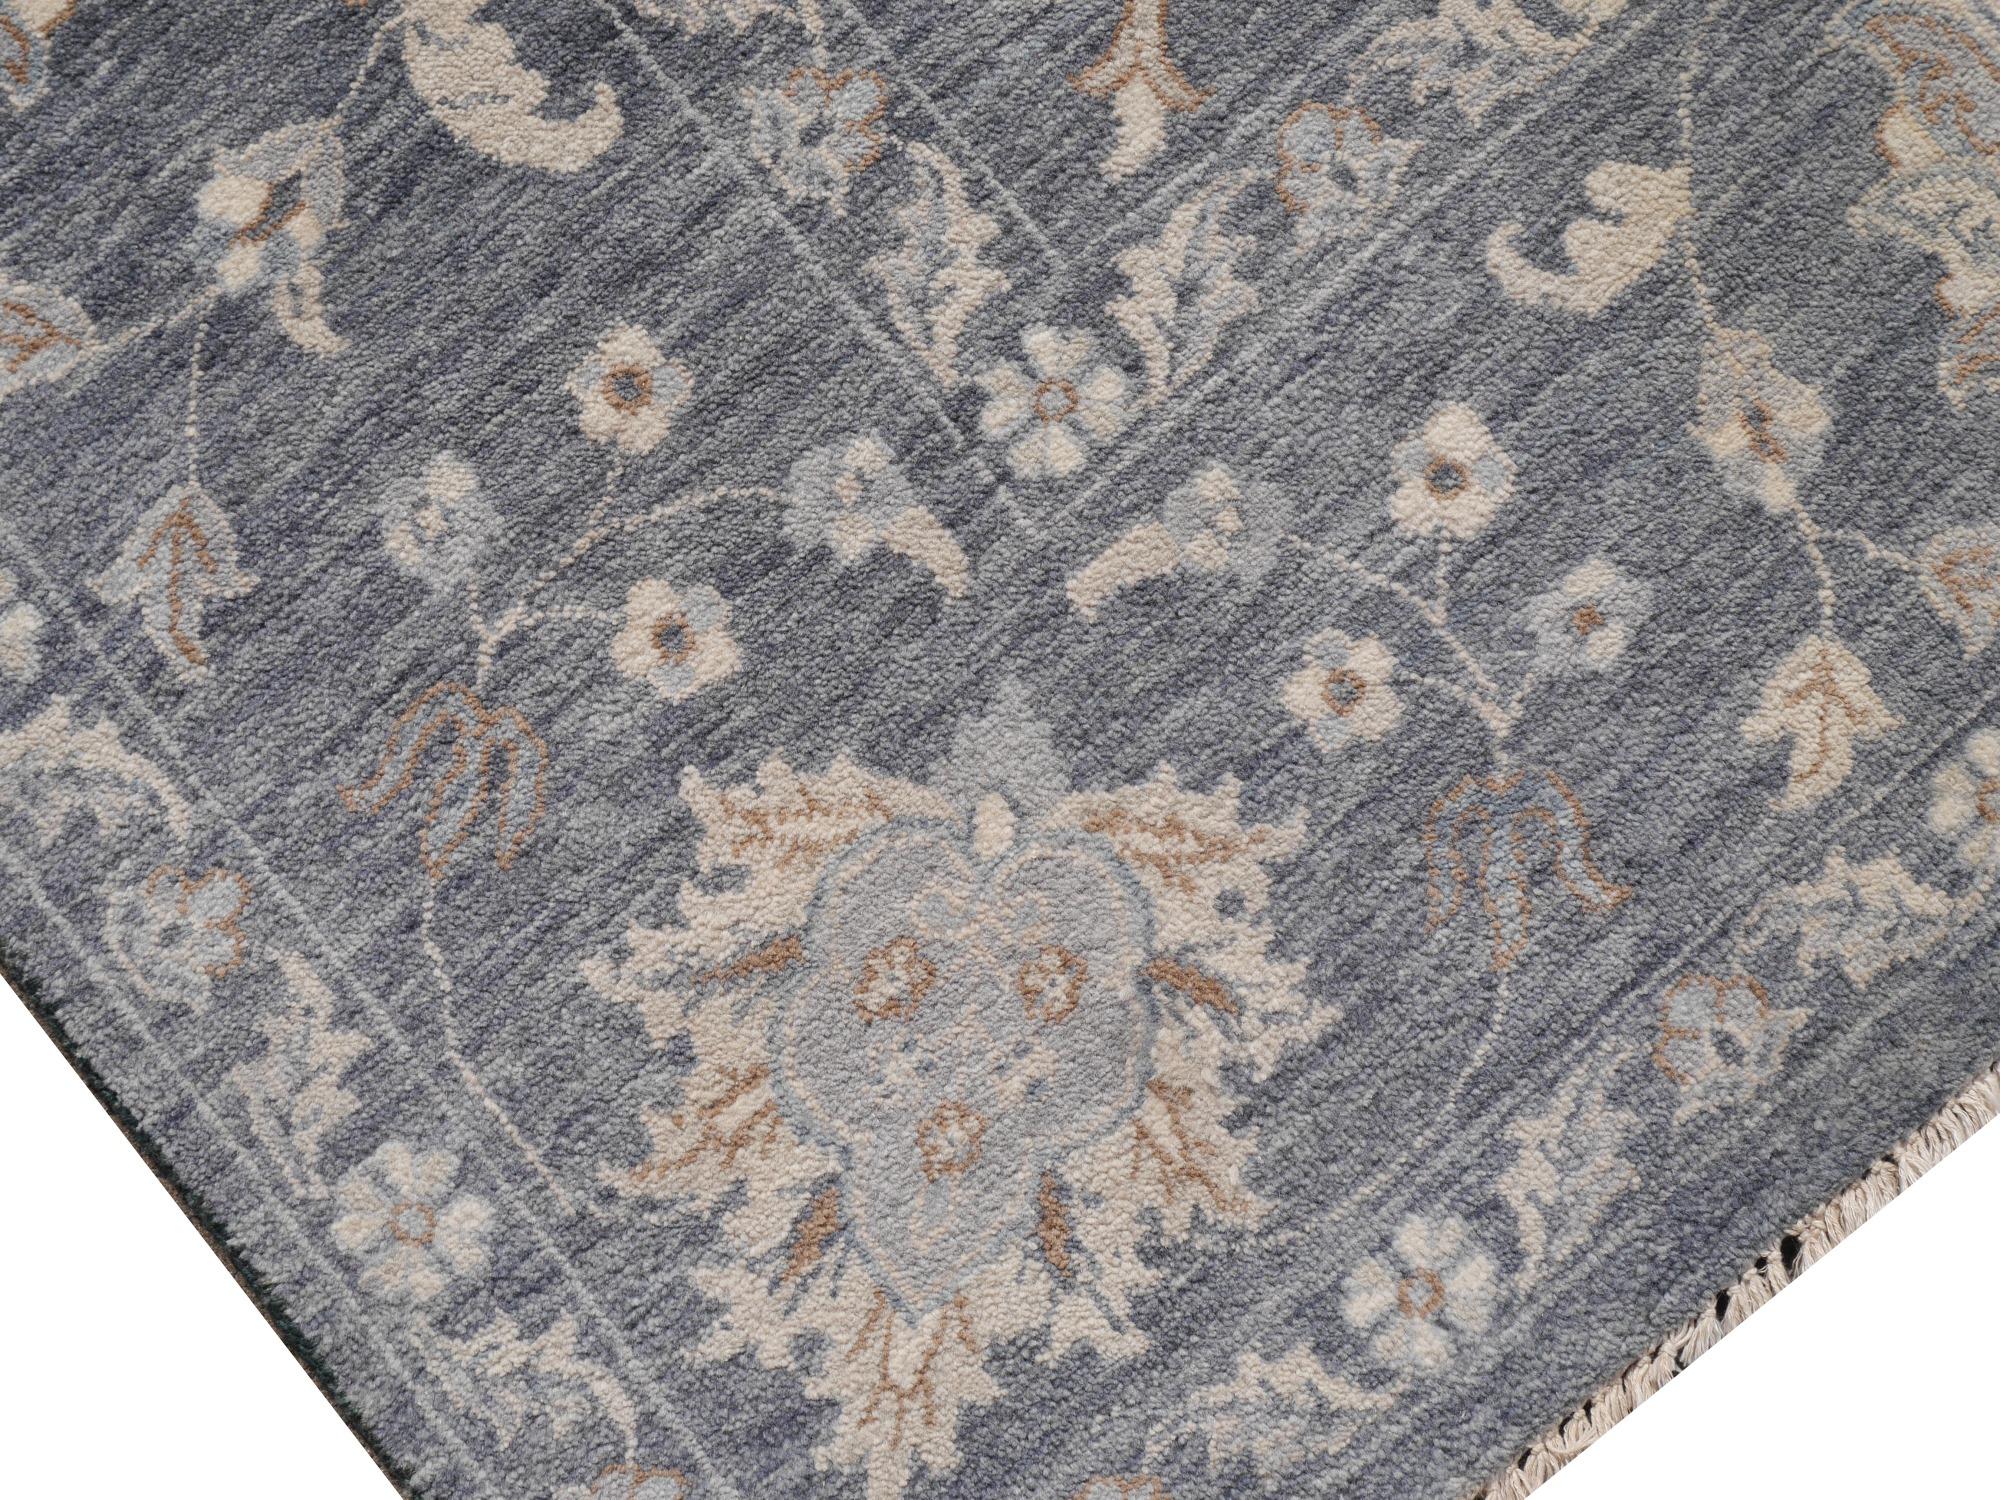 A large room sized rug with design in style of Oushak.
This beautiful rug was hand knotted to fit 21st century interior needs. The background is in an elegant gray color with floral designs.
Oushak design rugs are very looked after since they go